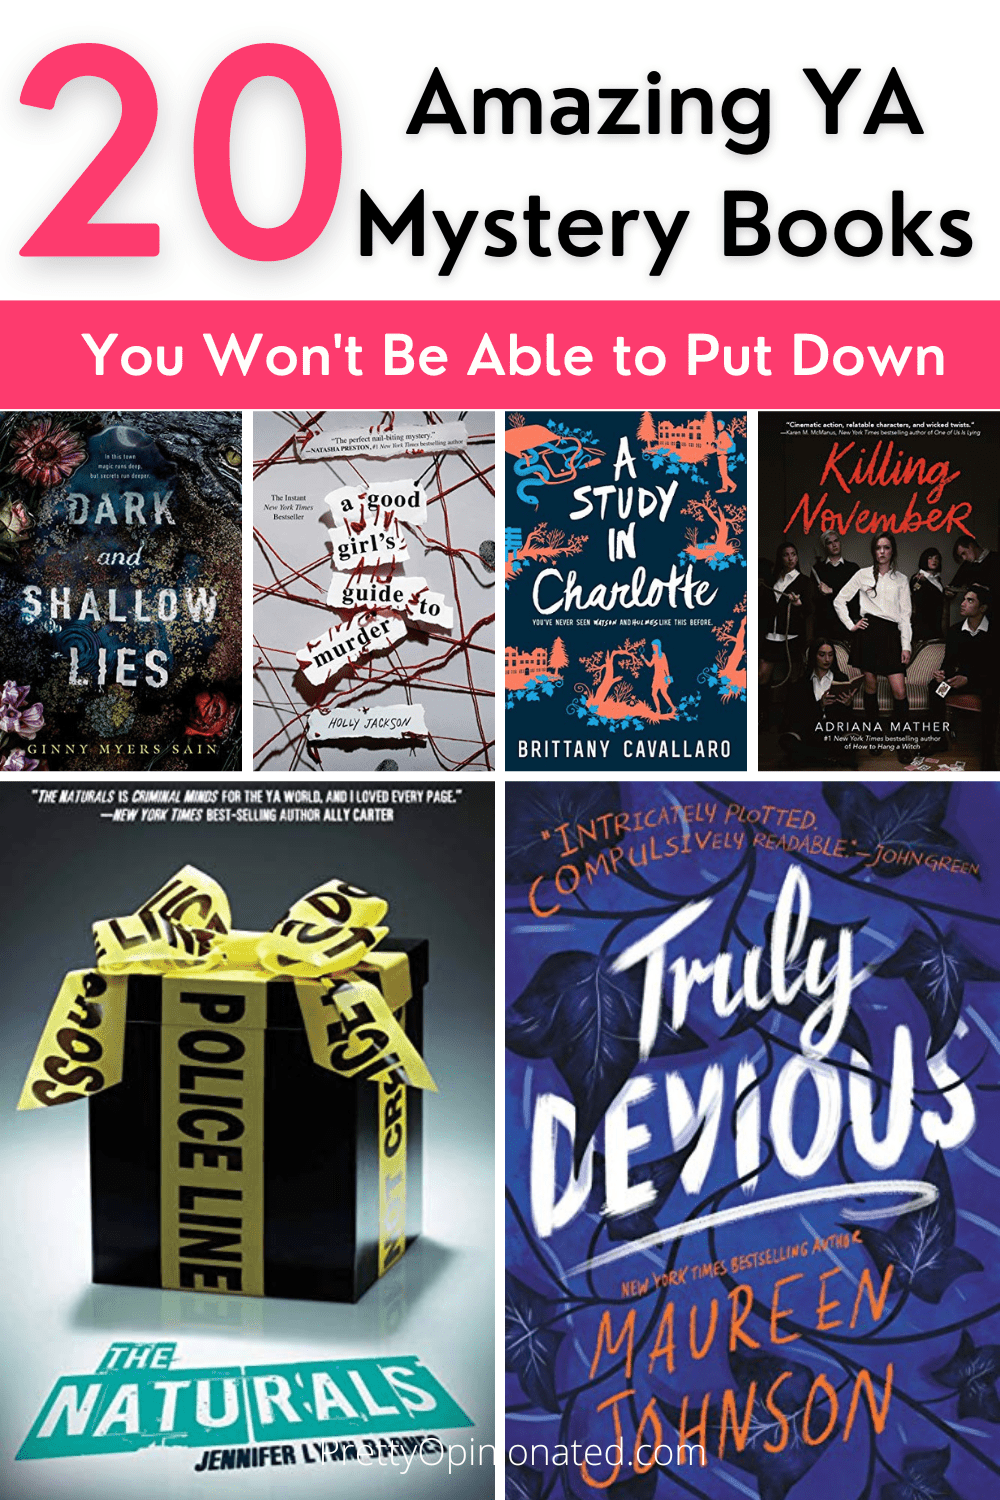 From charming detective tales to mind-bending suspense novels full of shocking twists & turns, here are 20 YA mystery books that you won't be able to put down. Enjoy!